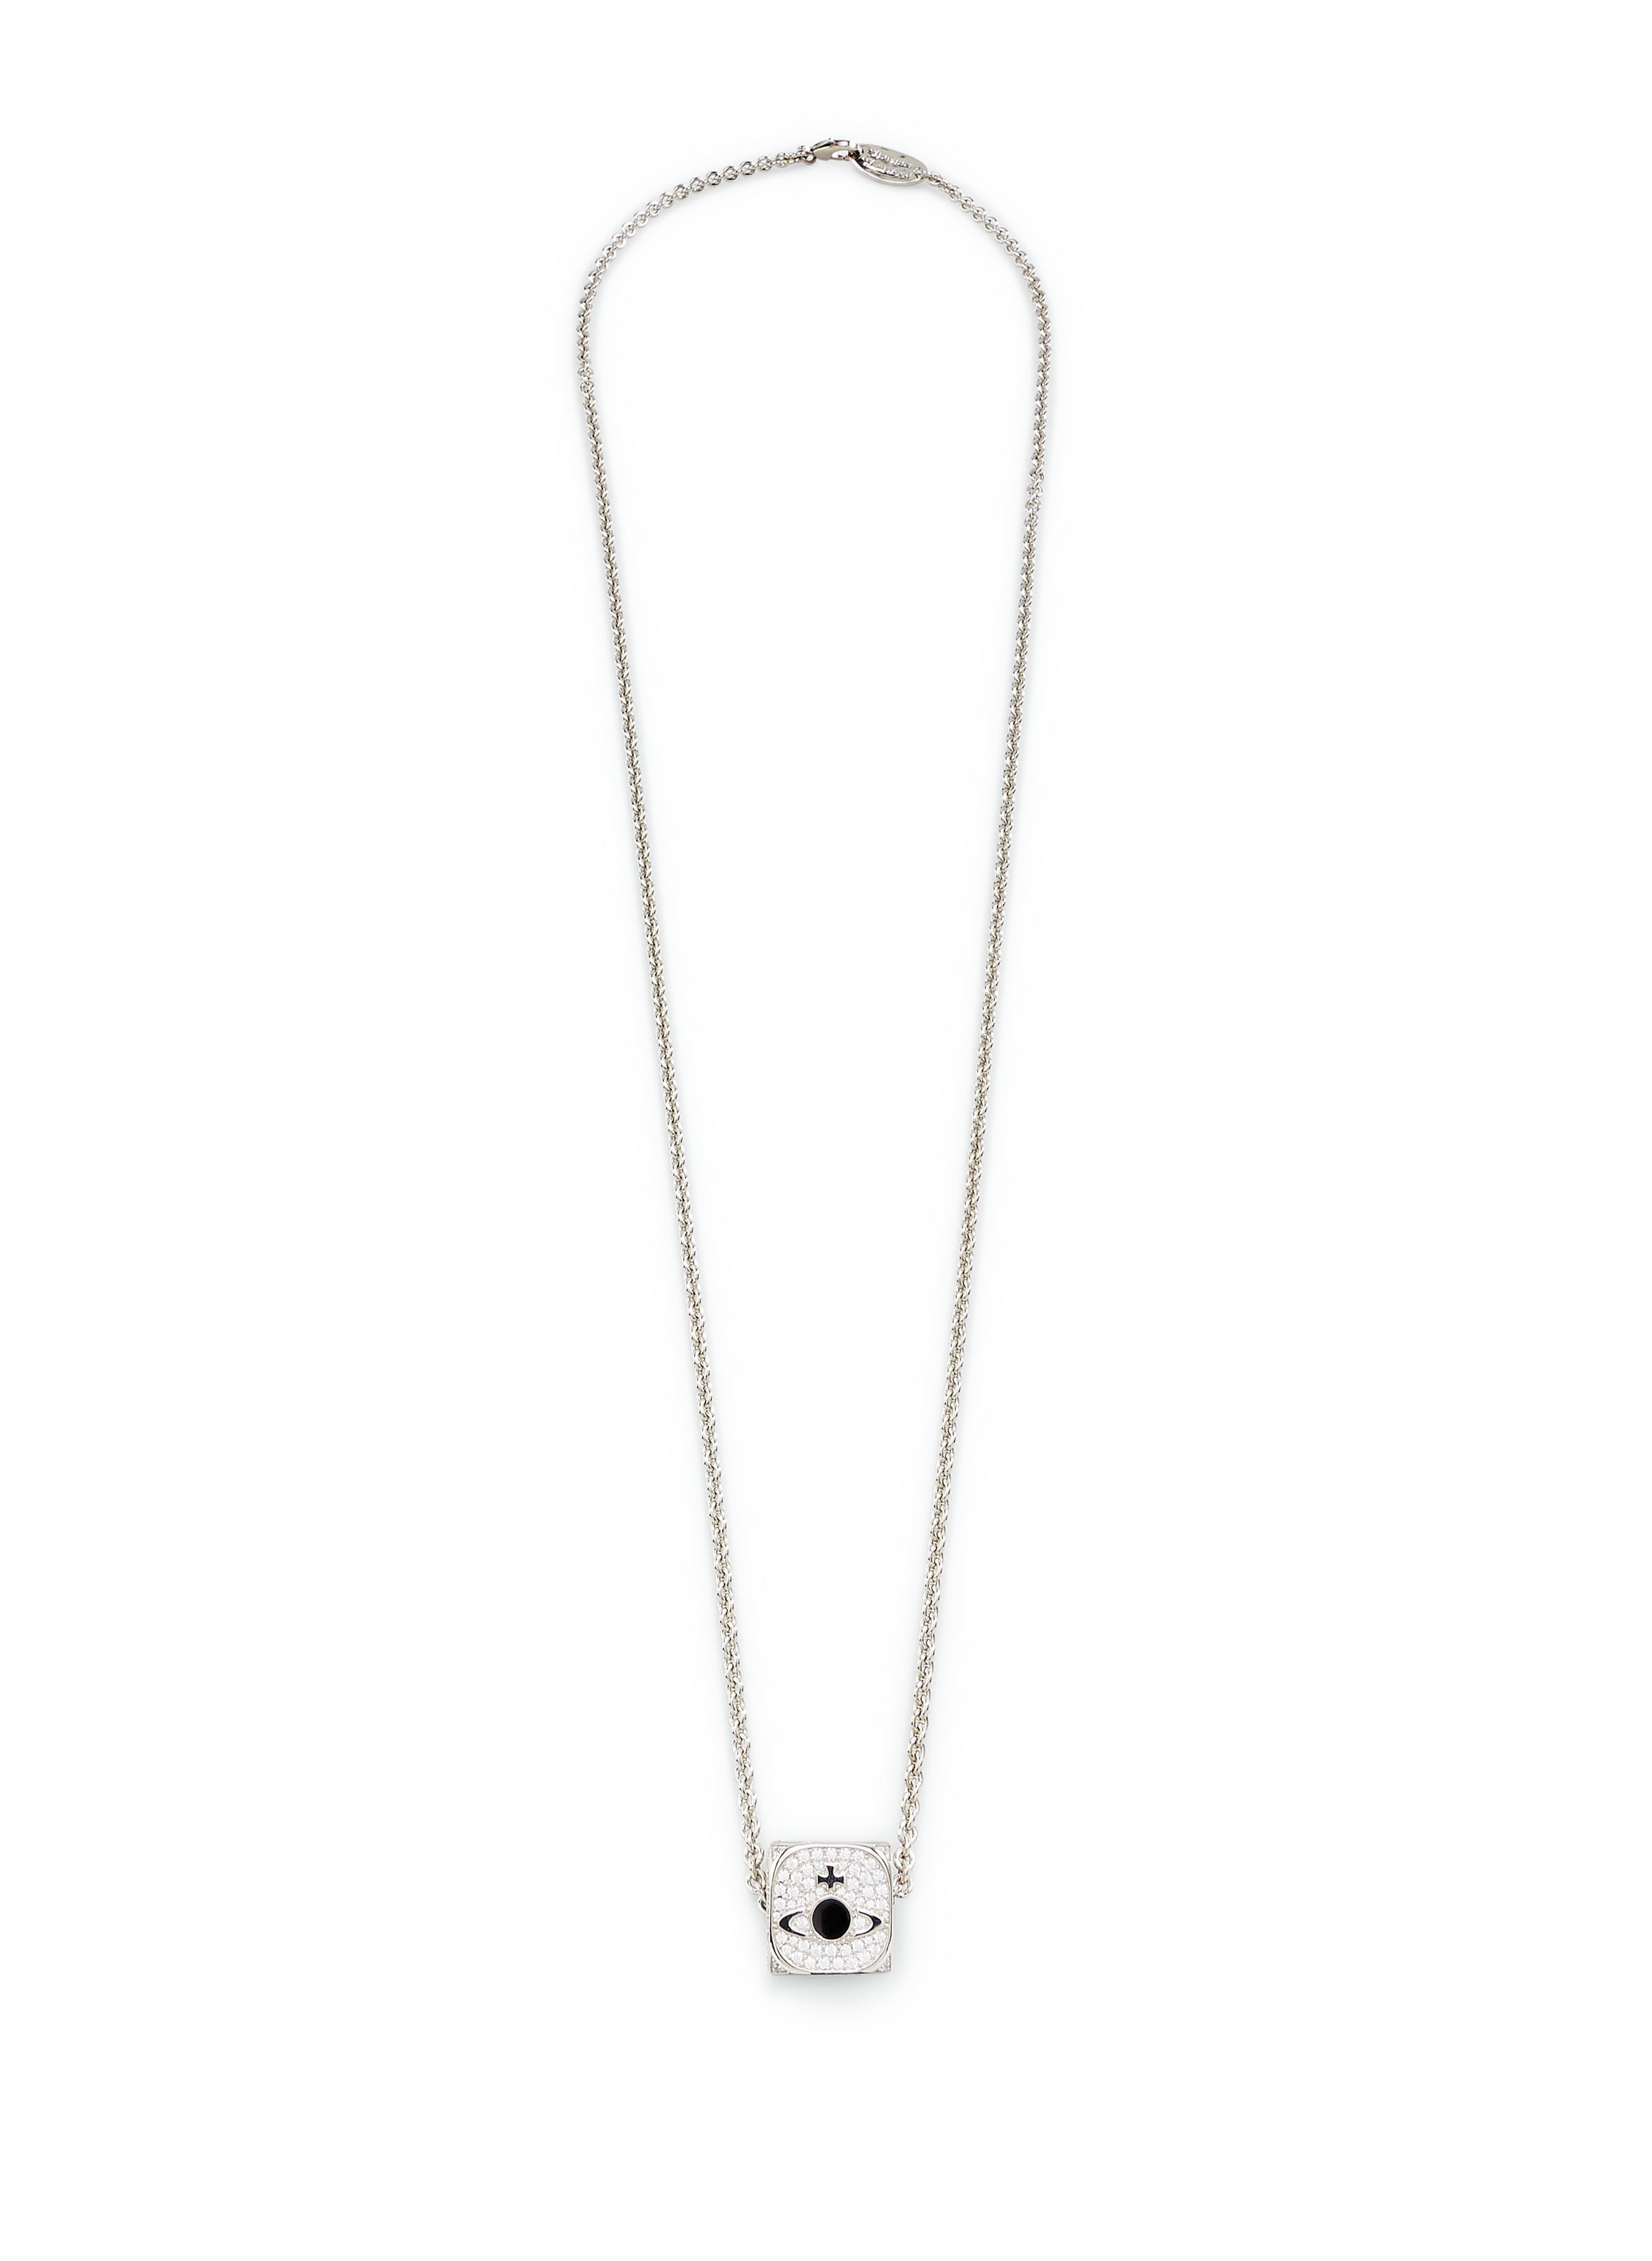 Buy VIVIENNE WESTWOOD Justino Chain Necklace - Silver At 60% Off |  Editorialist